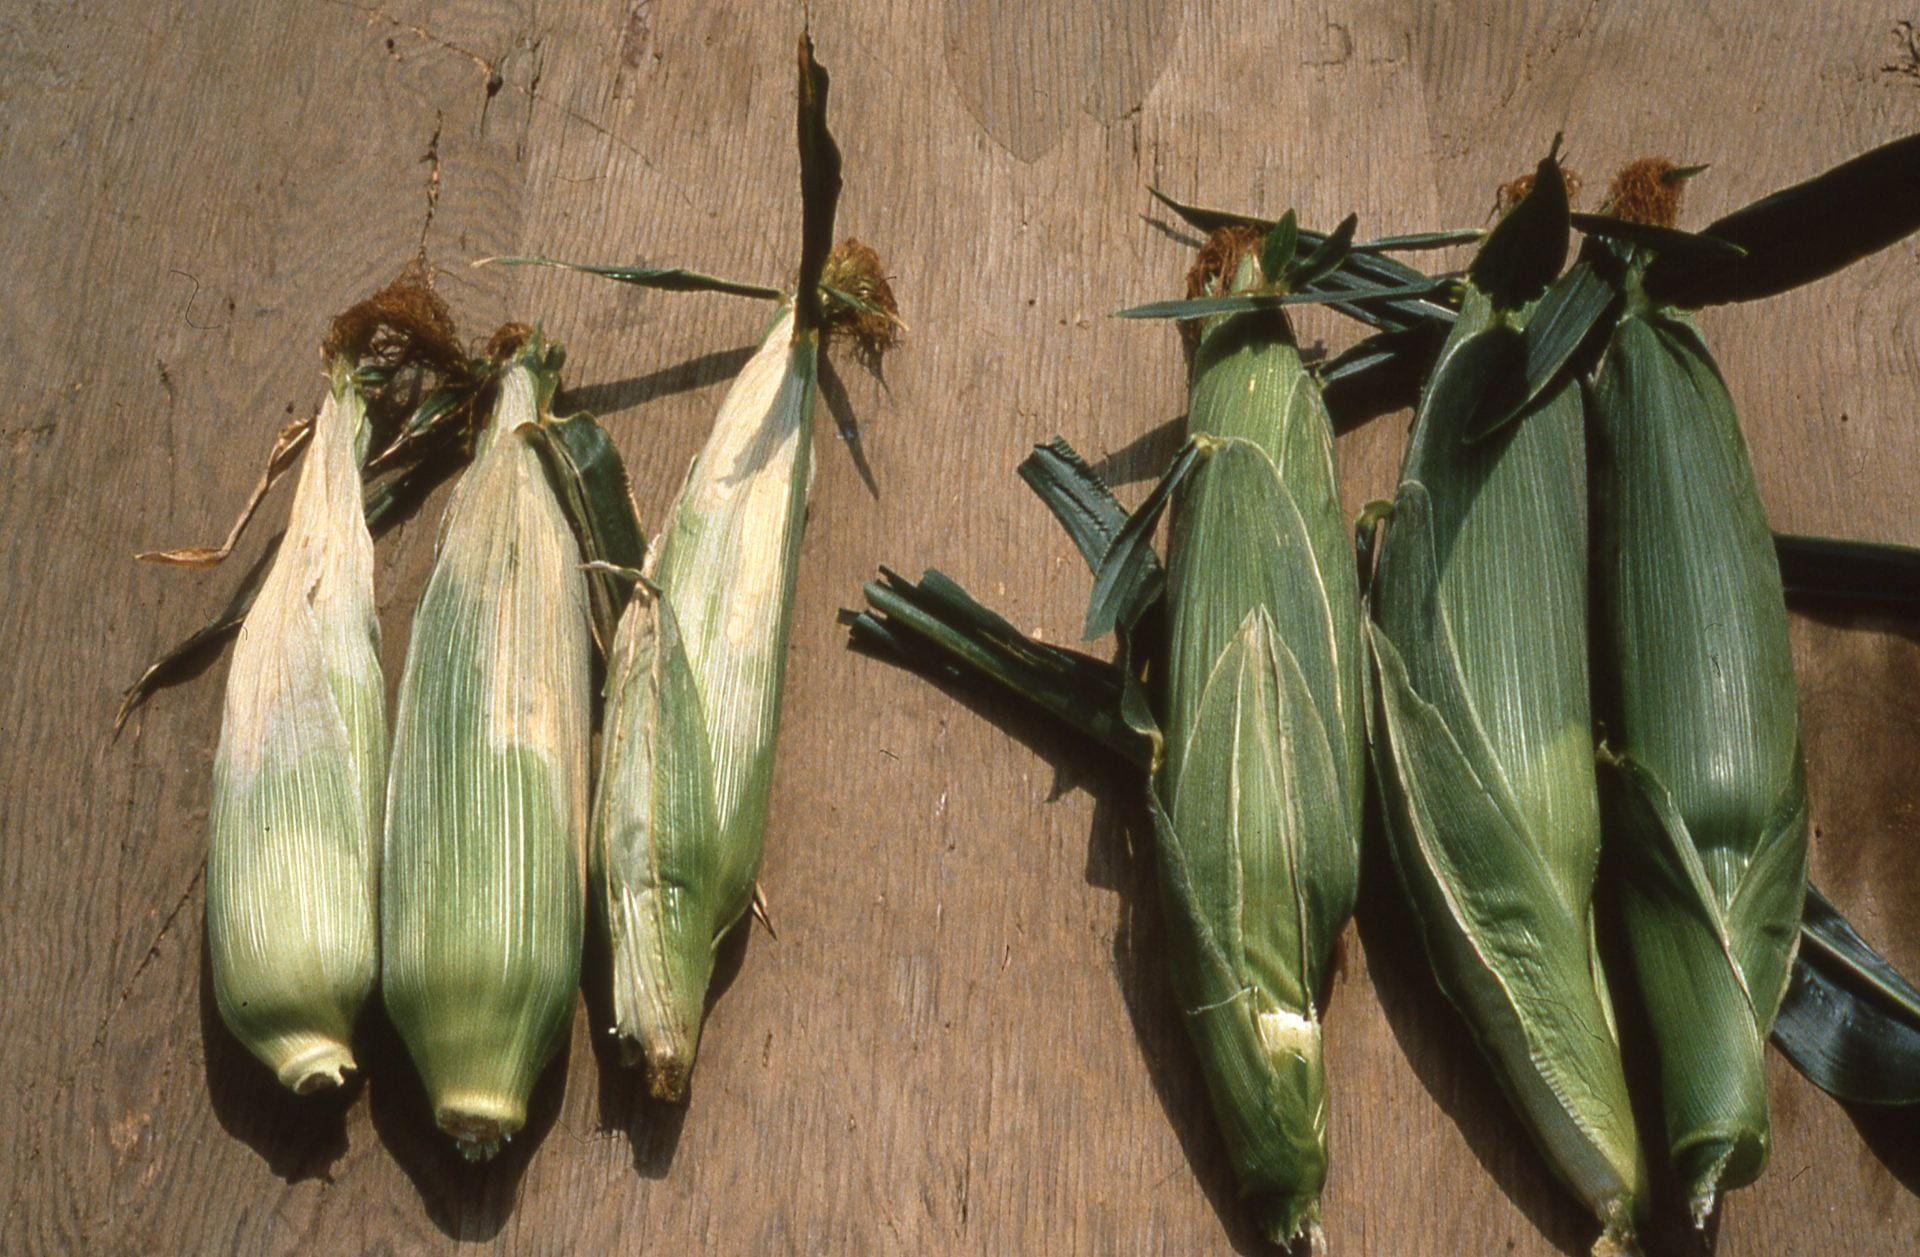 ears affected by stewarts wilt